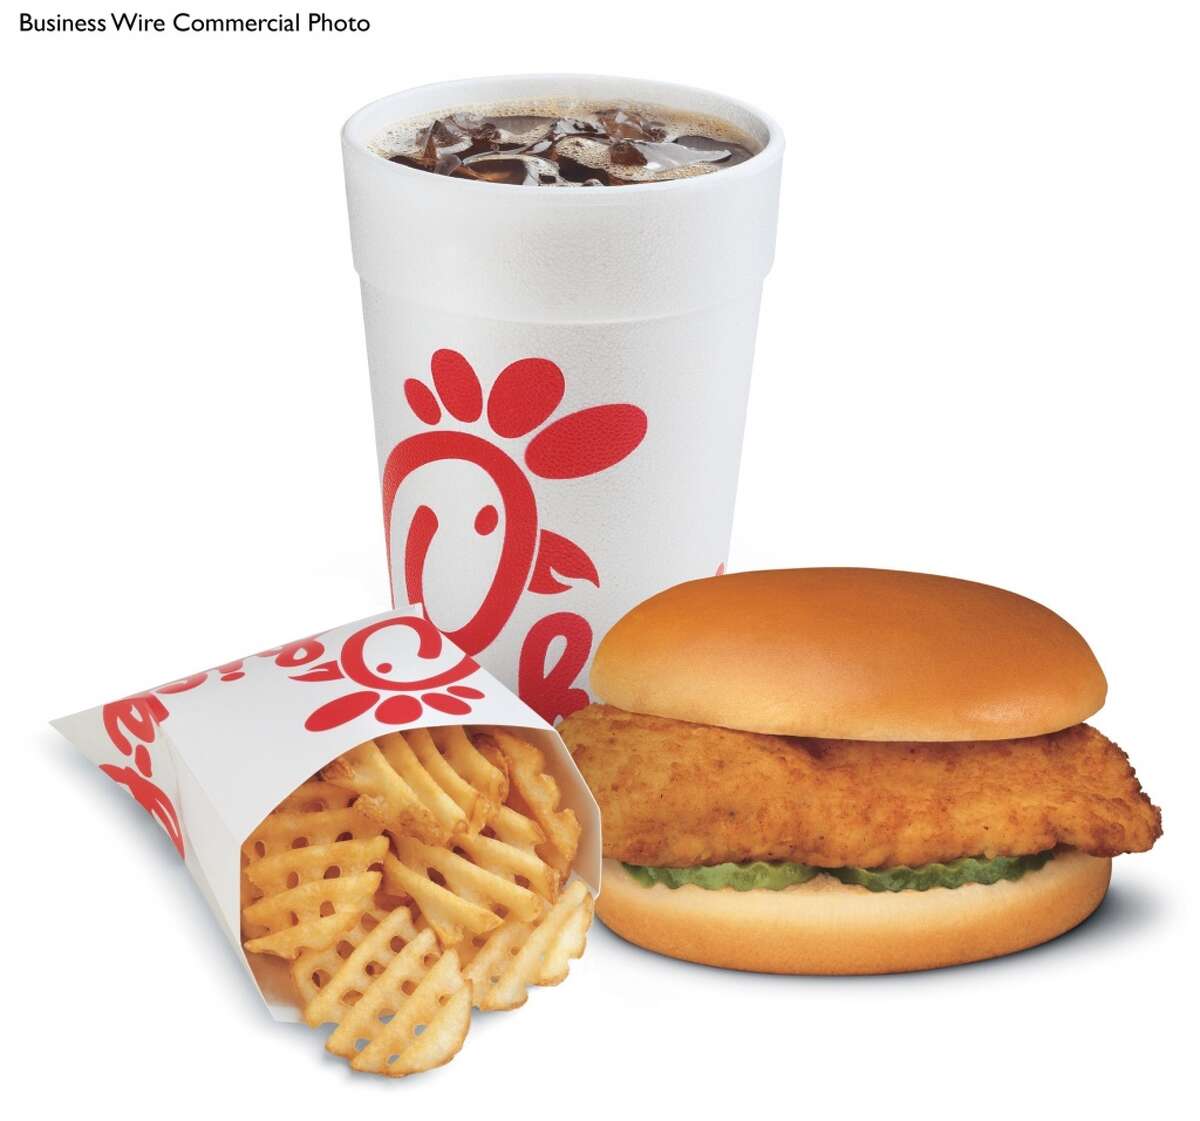 Chick-fil-A is planning to build a new restaurant on Troy-Schenectady Road in Colonie. It is one of two free-standing restaurants the chain has proposed in the area in recent weeks.